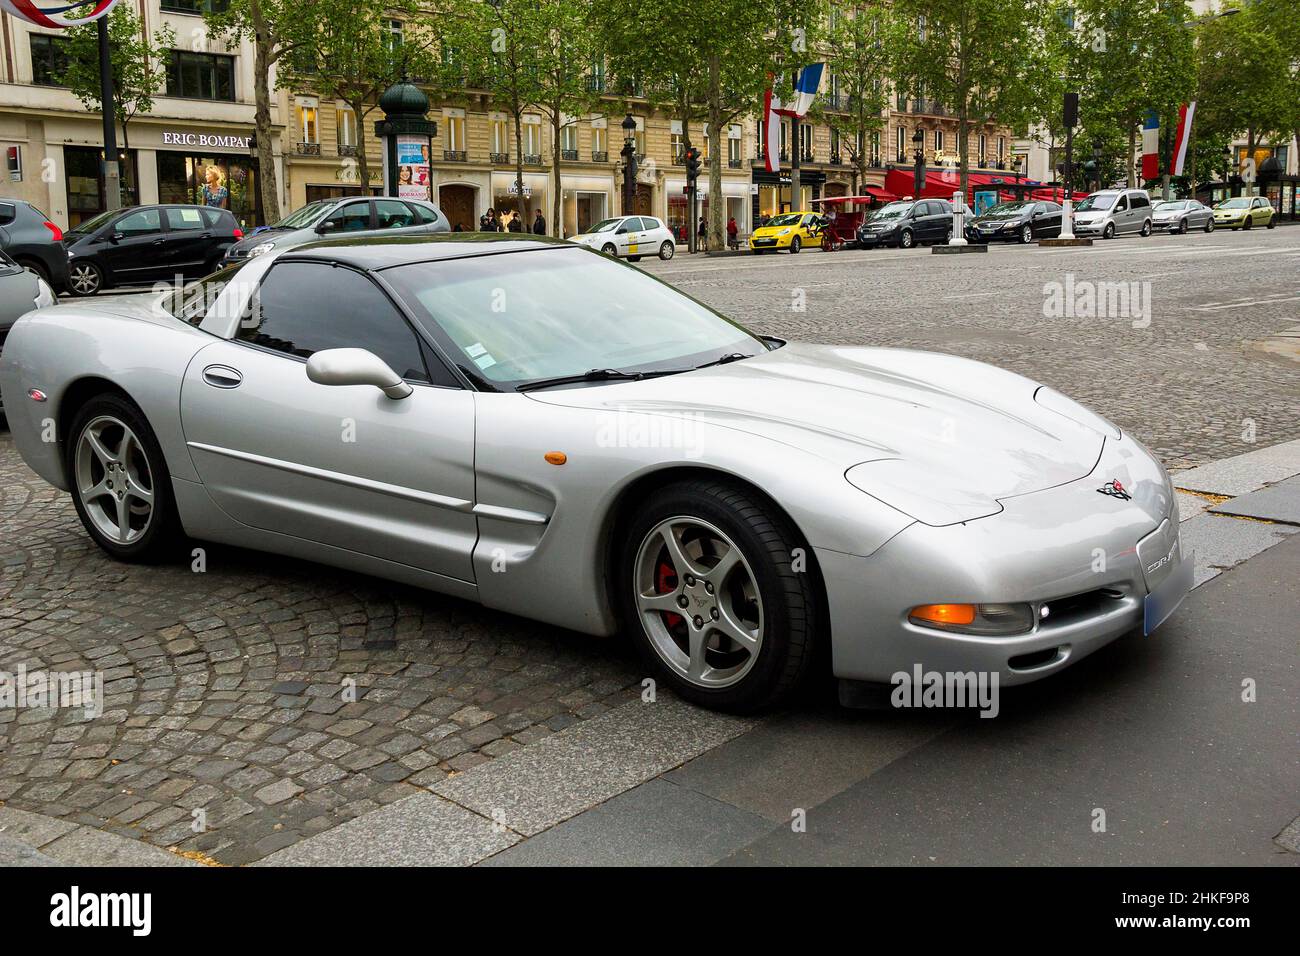 This is a luxury French car Chevrolet Corvette C5 moving down the street May 12, 2013 in Paris, France. Stock Photo